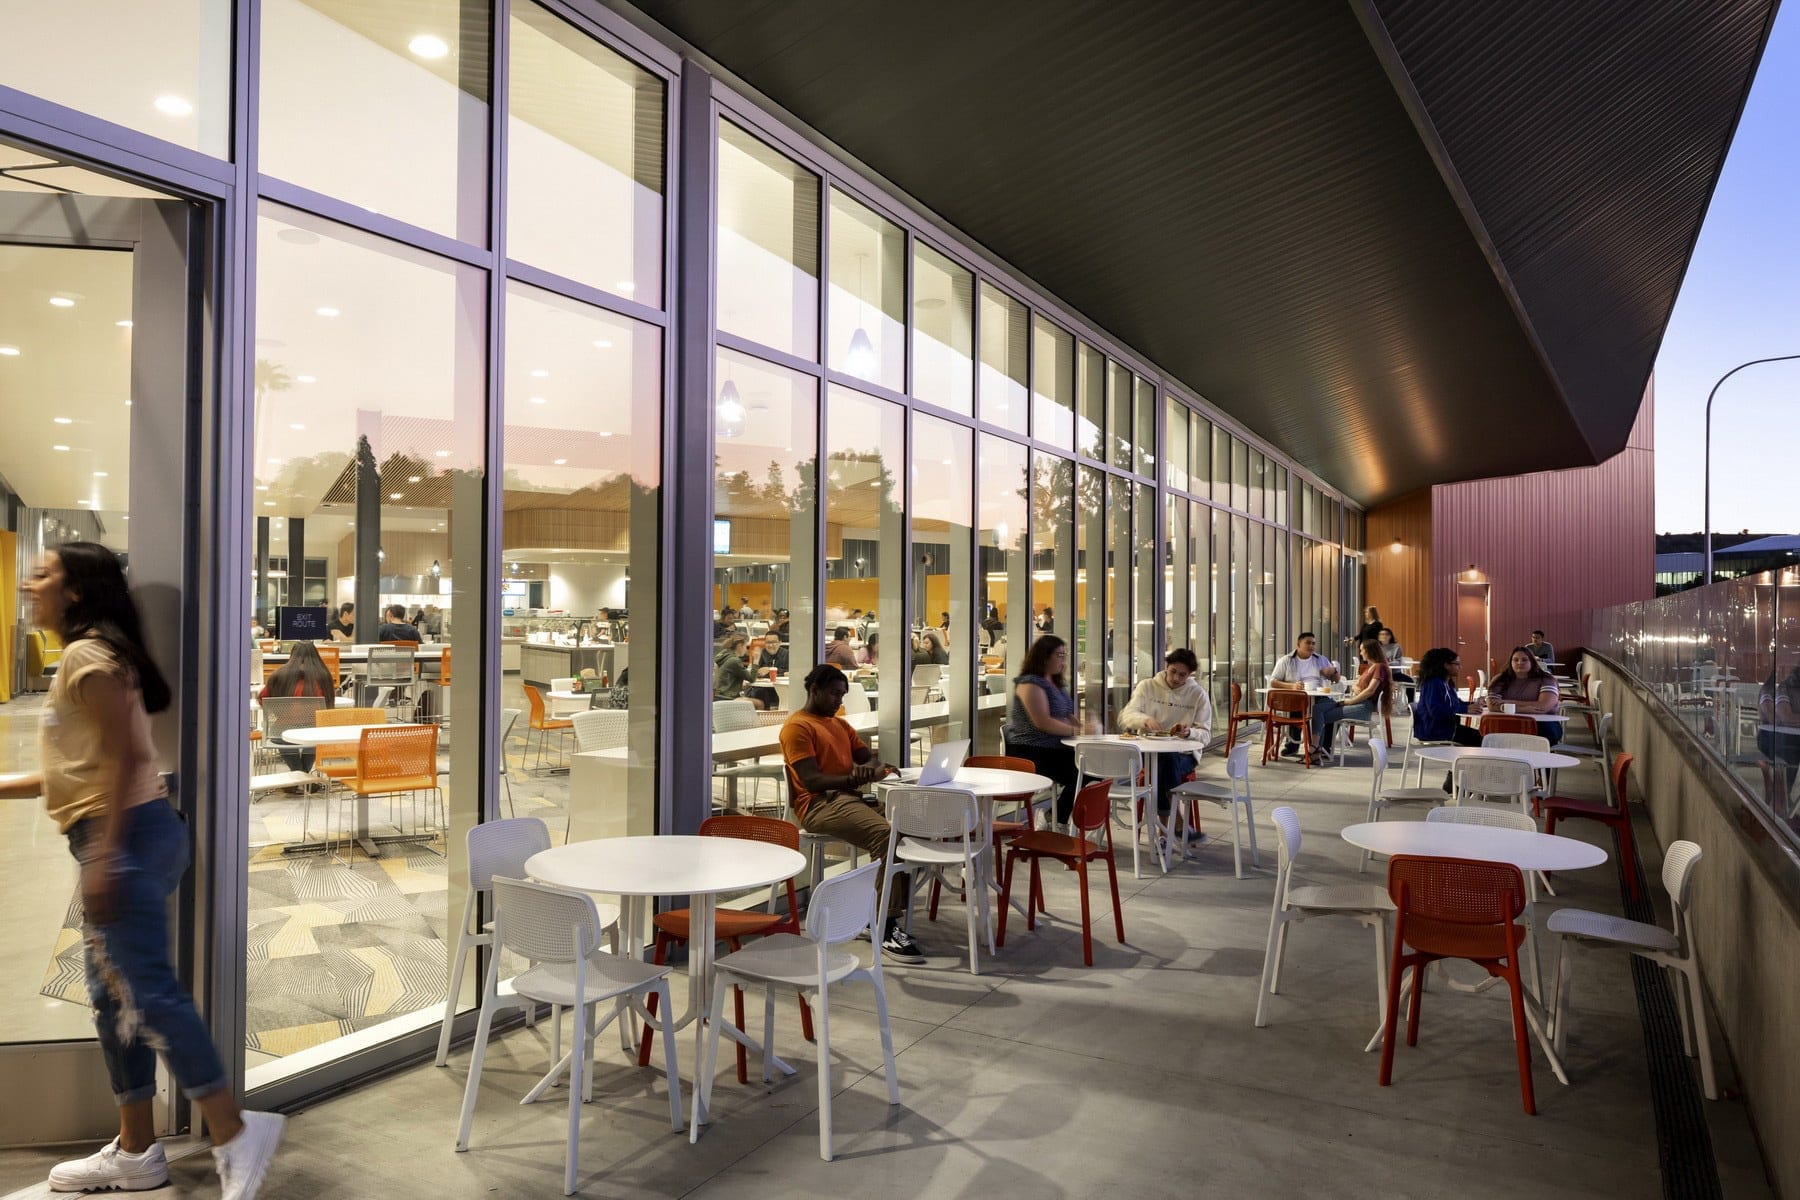 Cal Poly Pomona outdoor seating under awning.